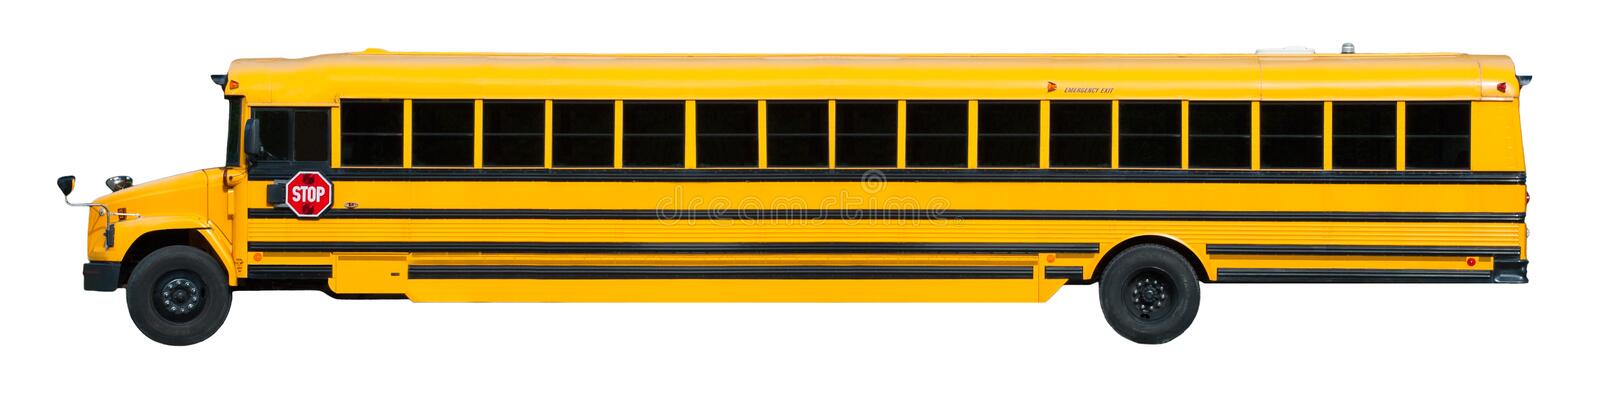 Name:  long-yellow-school-bus-banner-isolated-white-20333804.jpg
Views: 253
Size:  61.8 KB